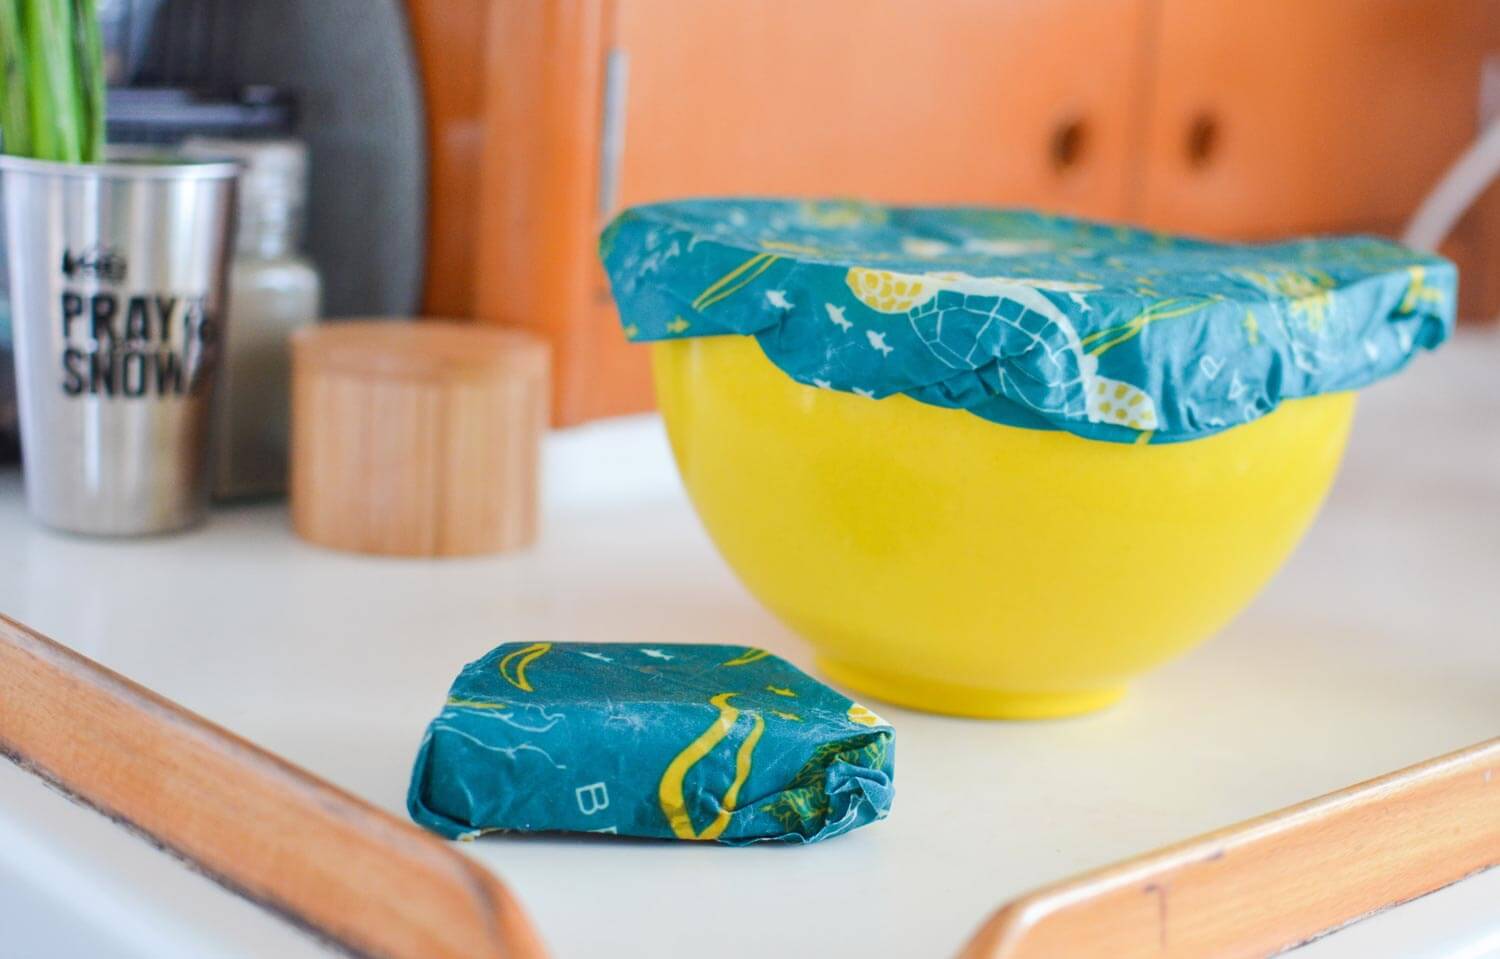 bees wax wraps covering serving bowl and wrapping up a wedge of cheese